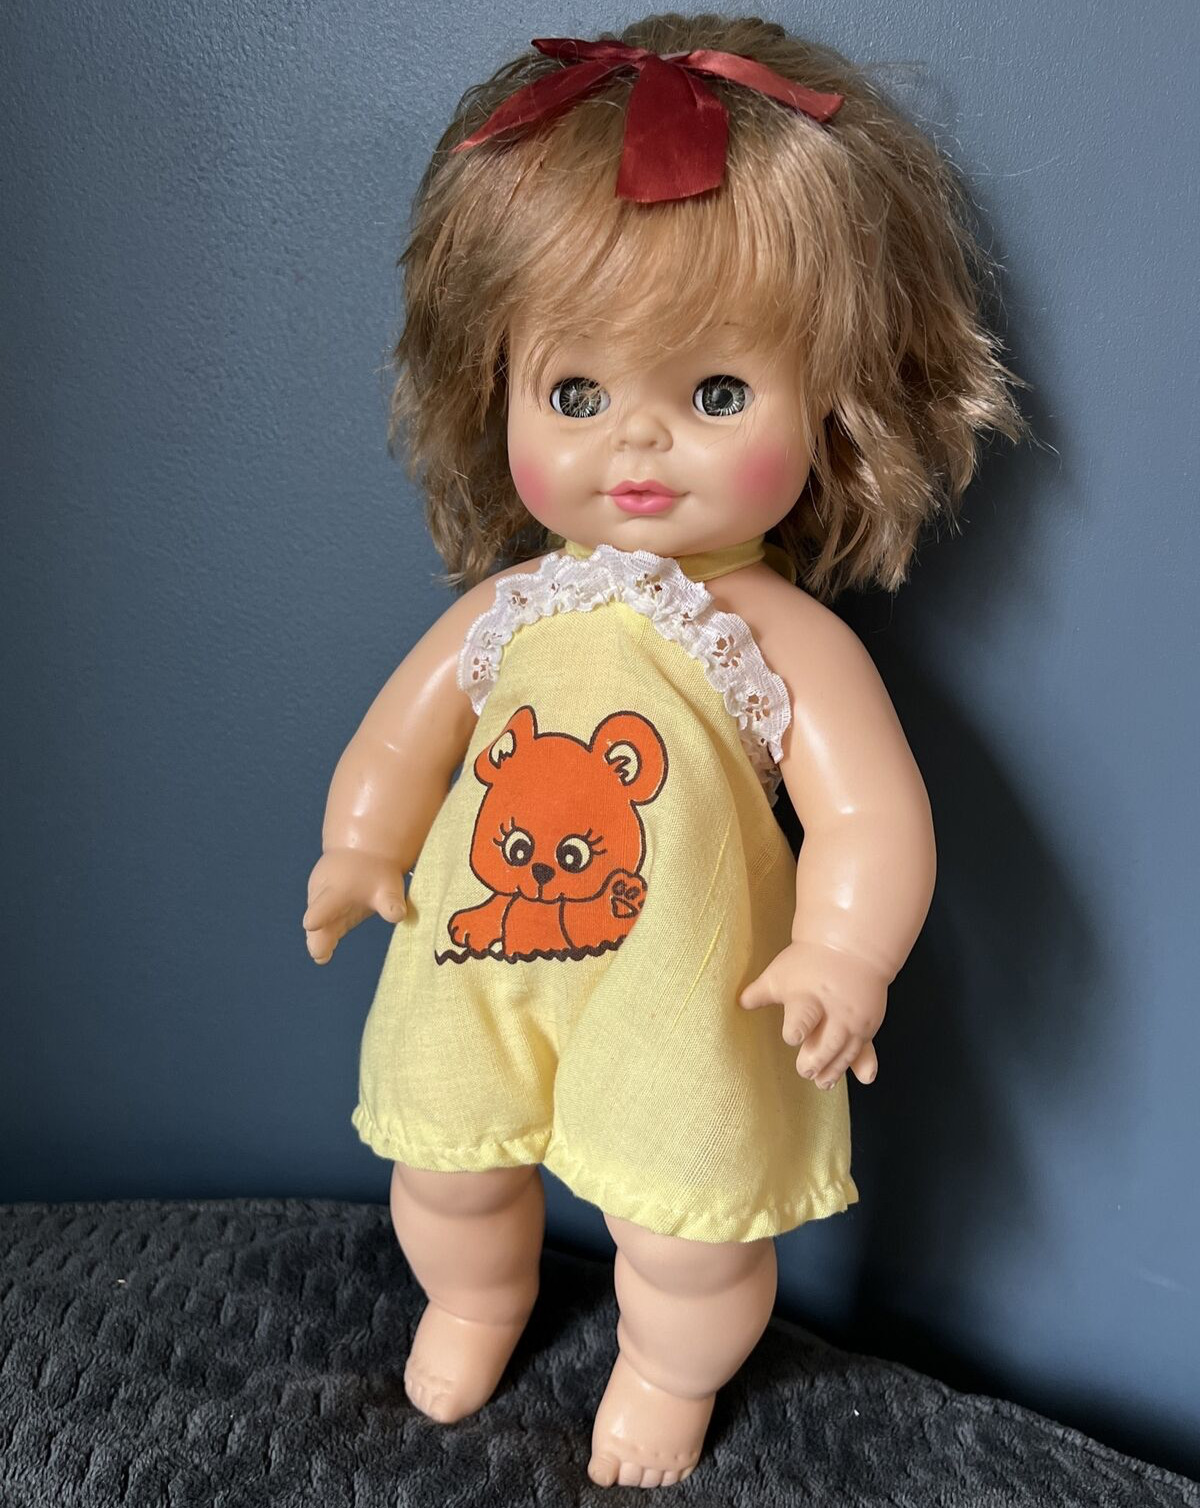 Vintage 1971 Horsman Drink & Wet 15” 70s Vinyl Baby Doll~ Yellow Bear Outfit